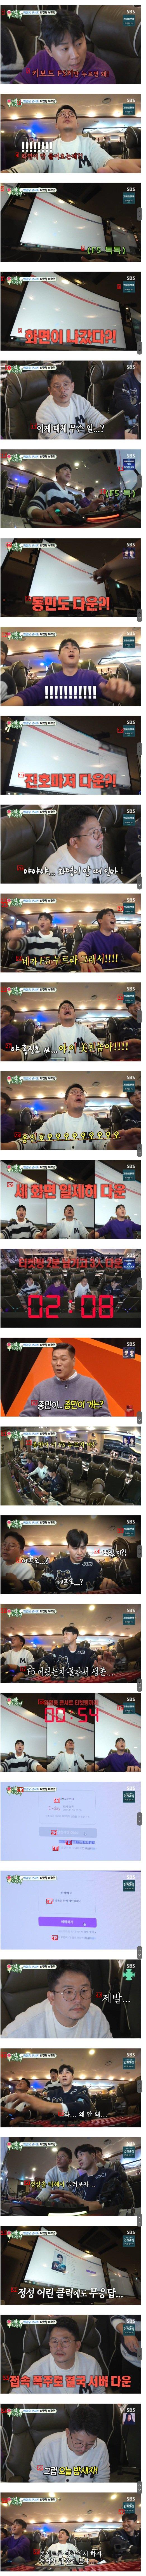 Yesterday's "My Little Old Boy" broadcast, which said that people who know ticketing well all over the country are in panic.jpg